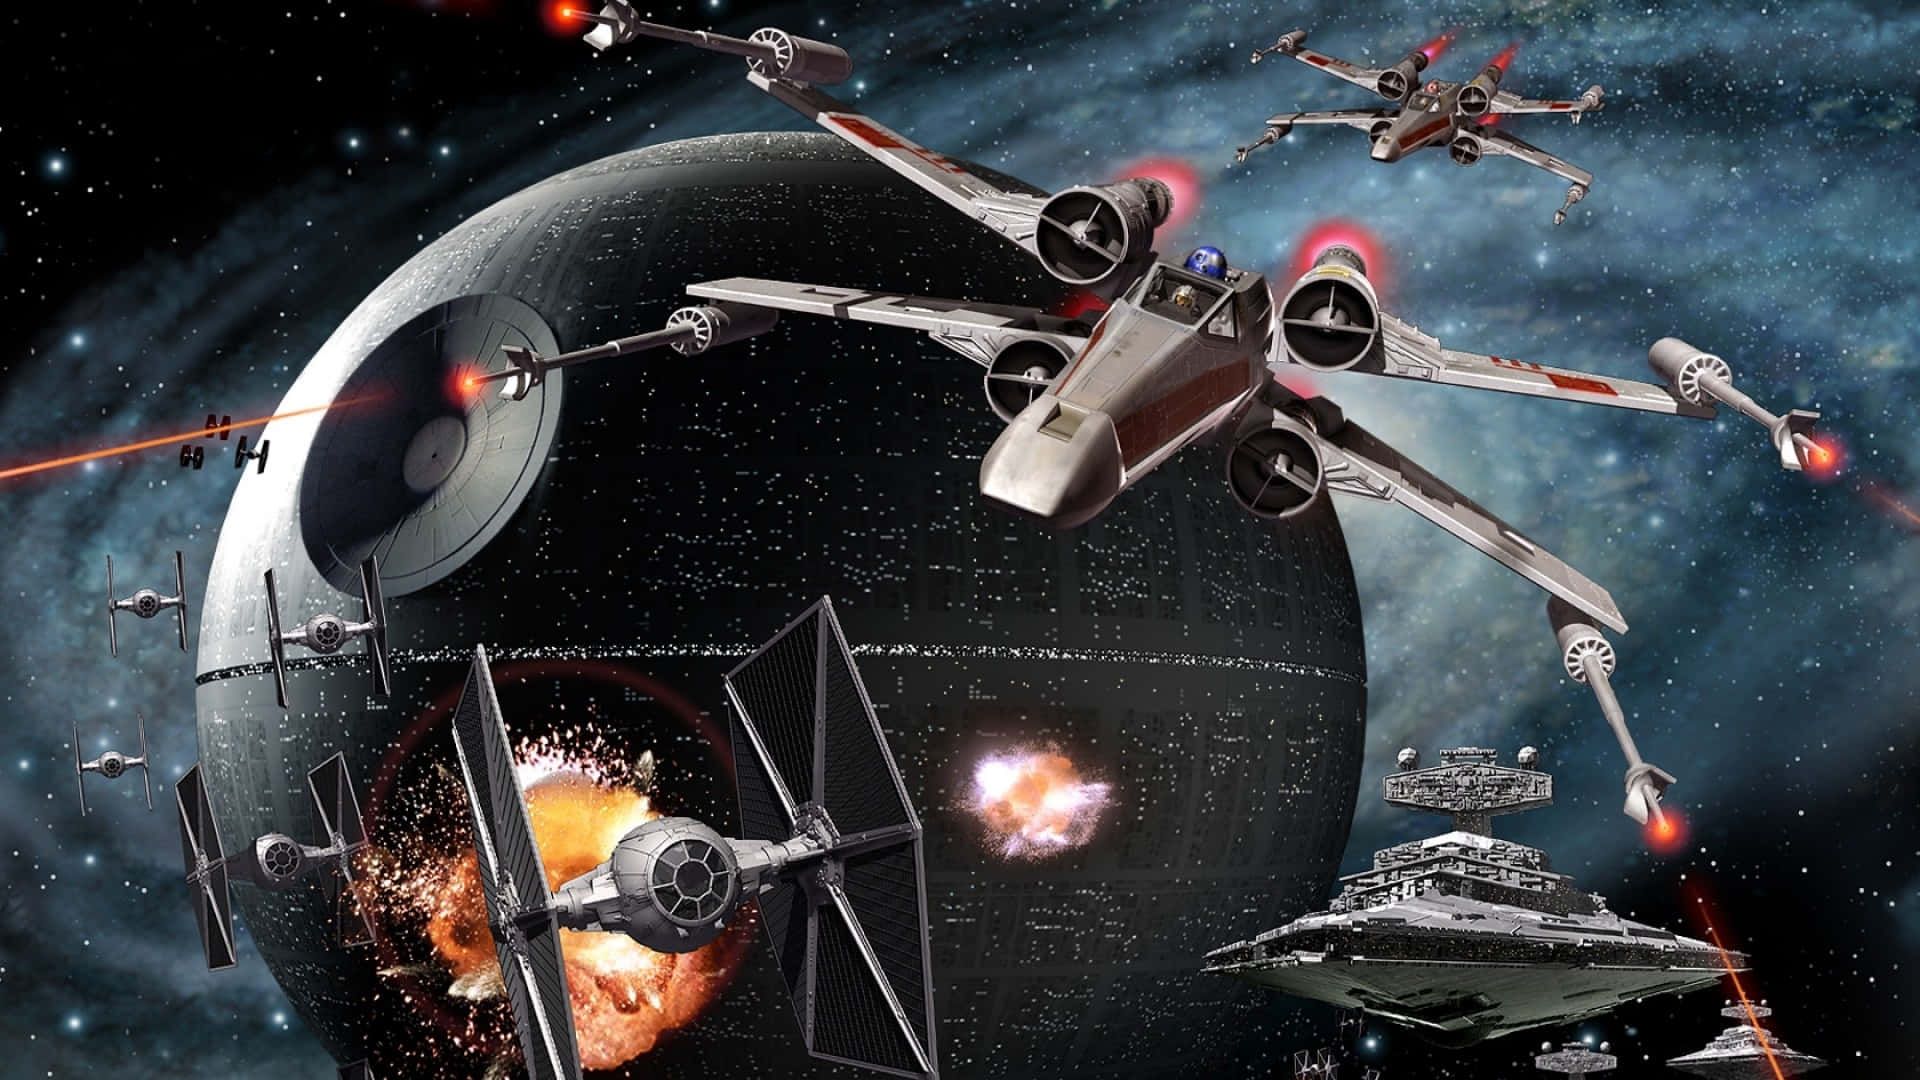 The Death Star II looms over a Star Destroyer in deep space. Wallpaper